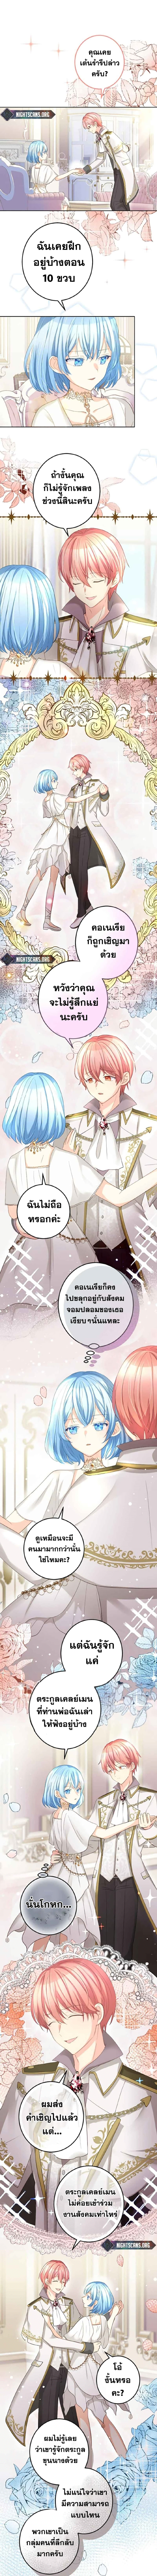 The Precious Girl Does Not Shed Tears ตอนที่ 13 (4)